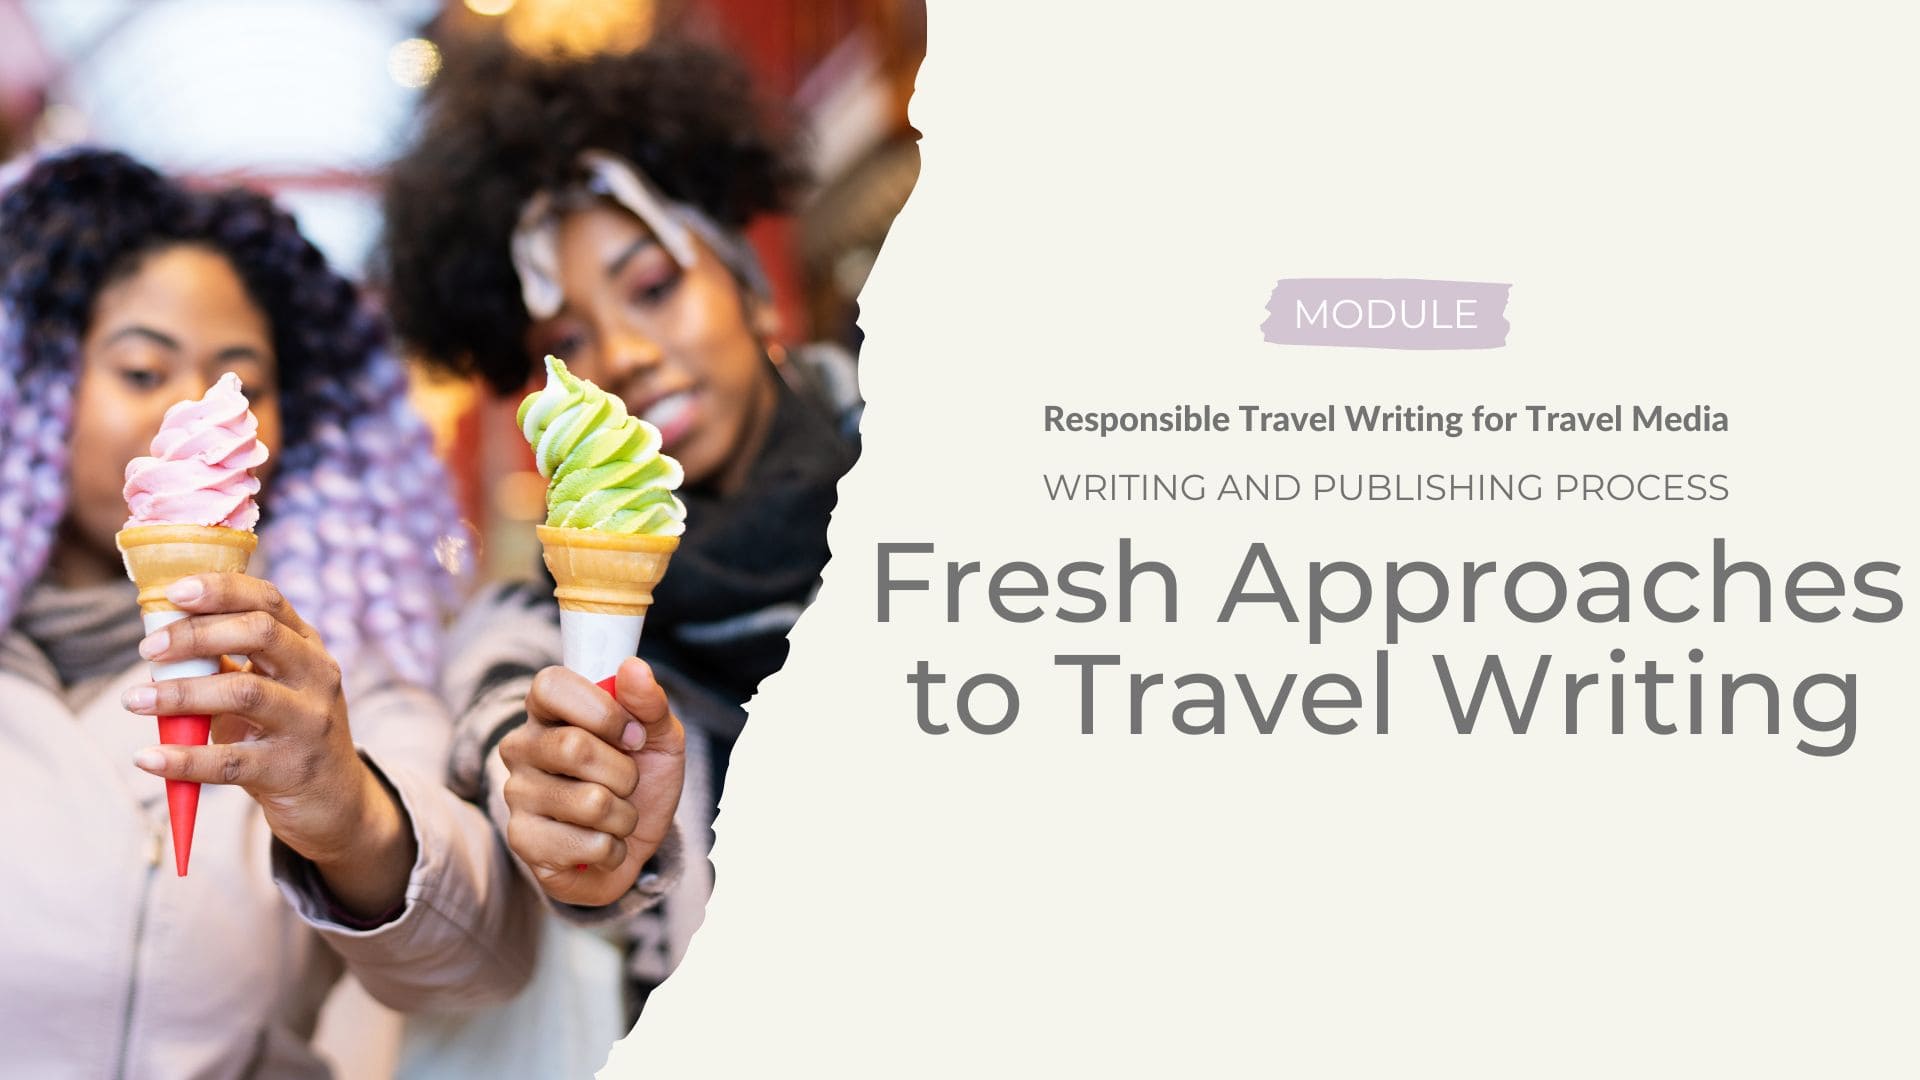 Writing and Publishing Process - Fresh Approaches to Travel Writing